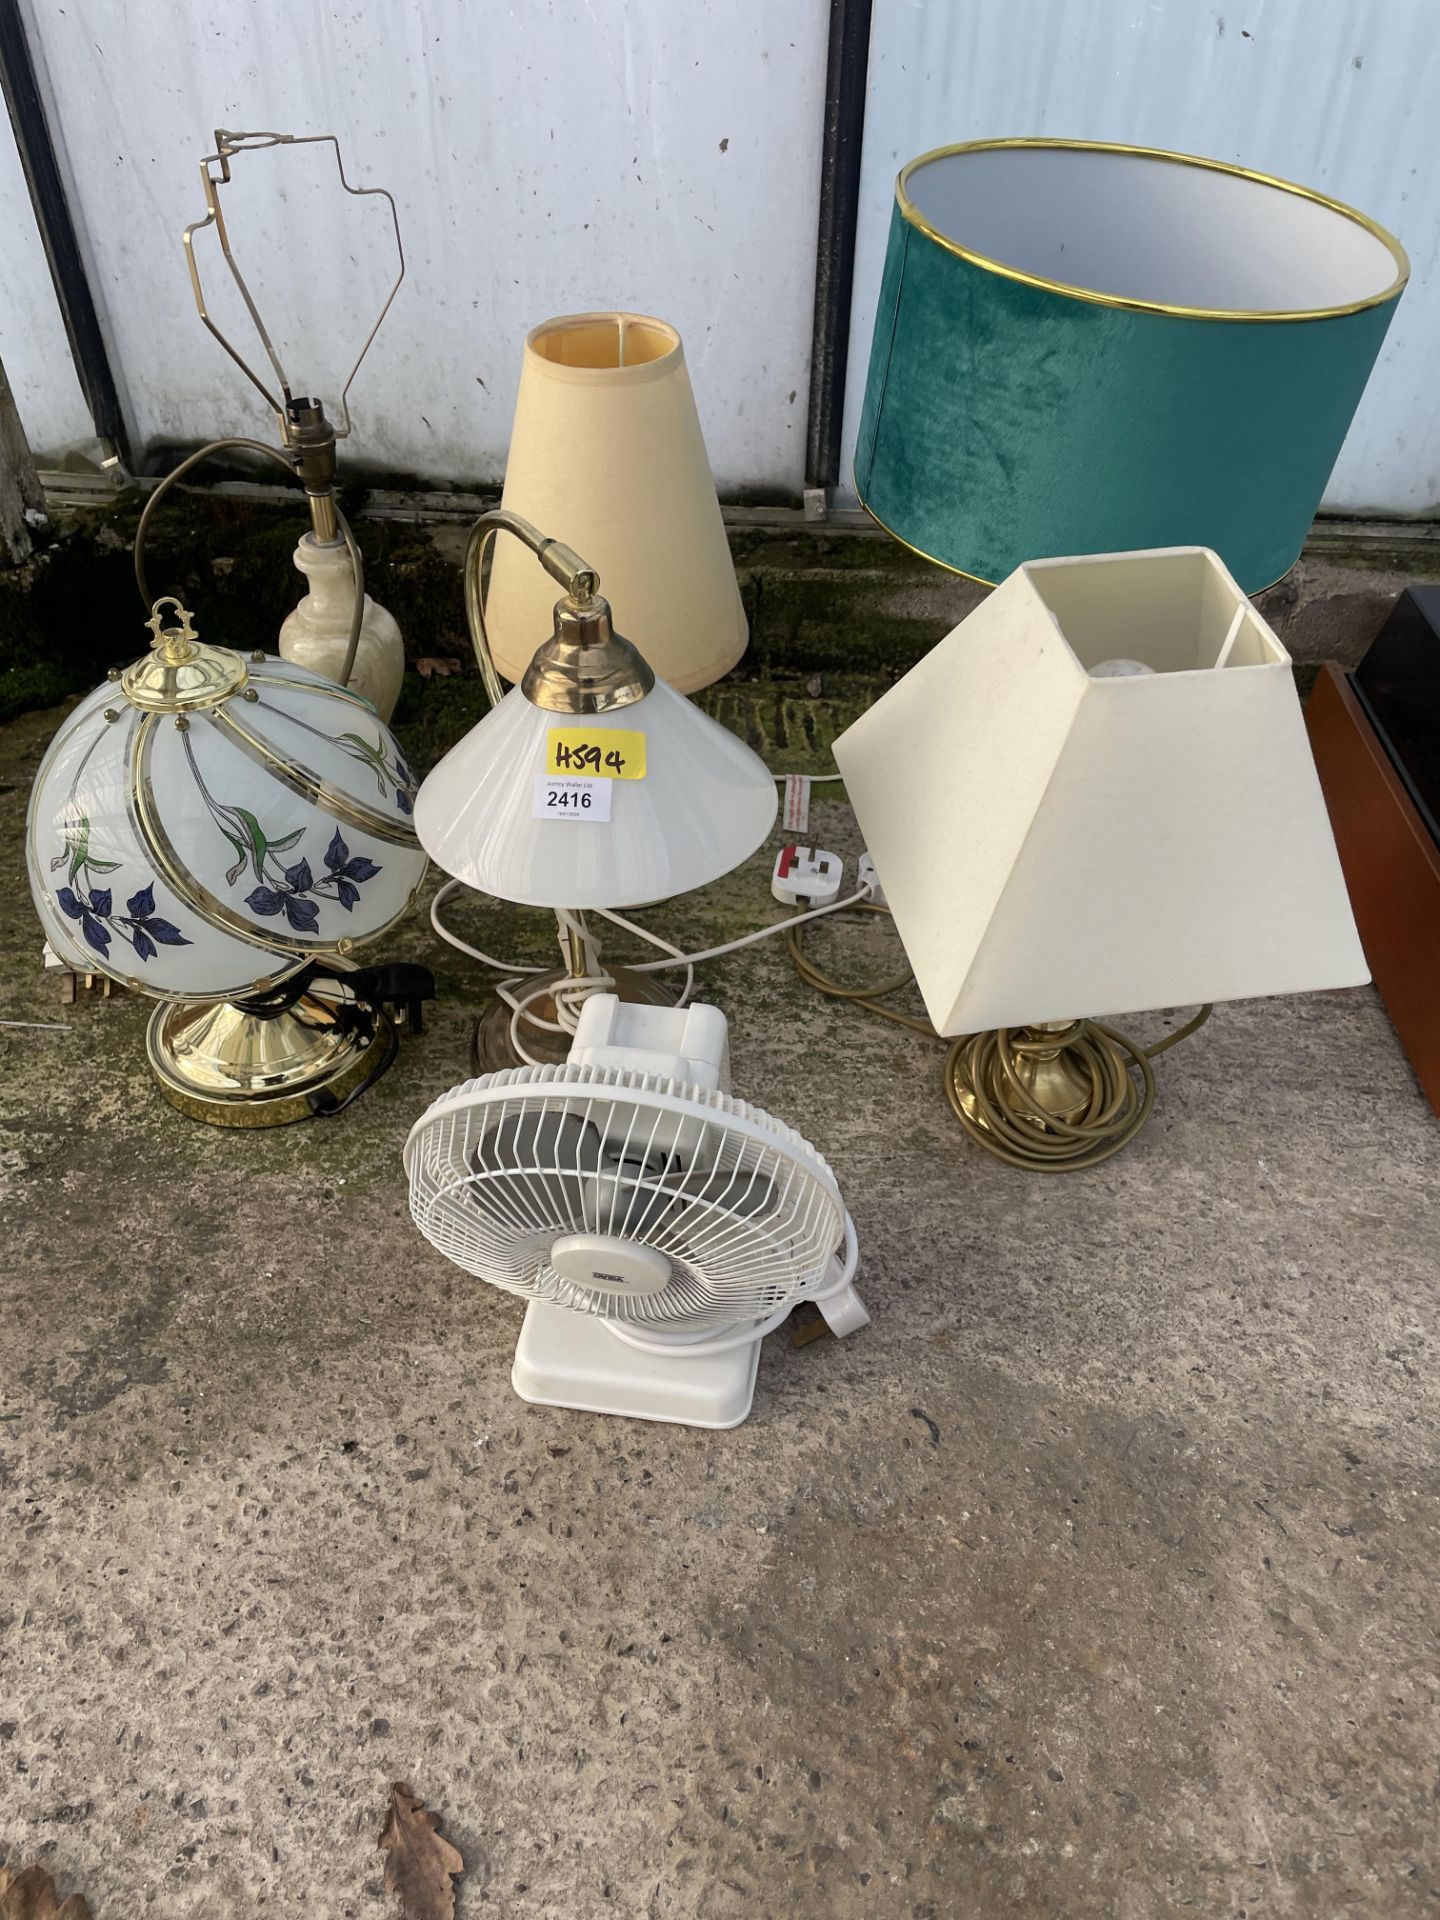 AN ASSORTMENT OF TABLE LAMPS AND A FAN